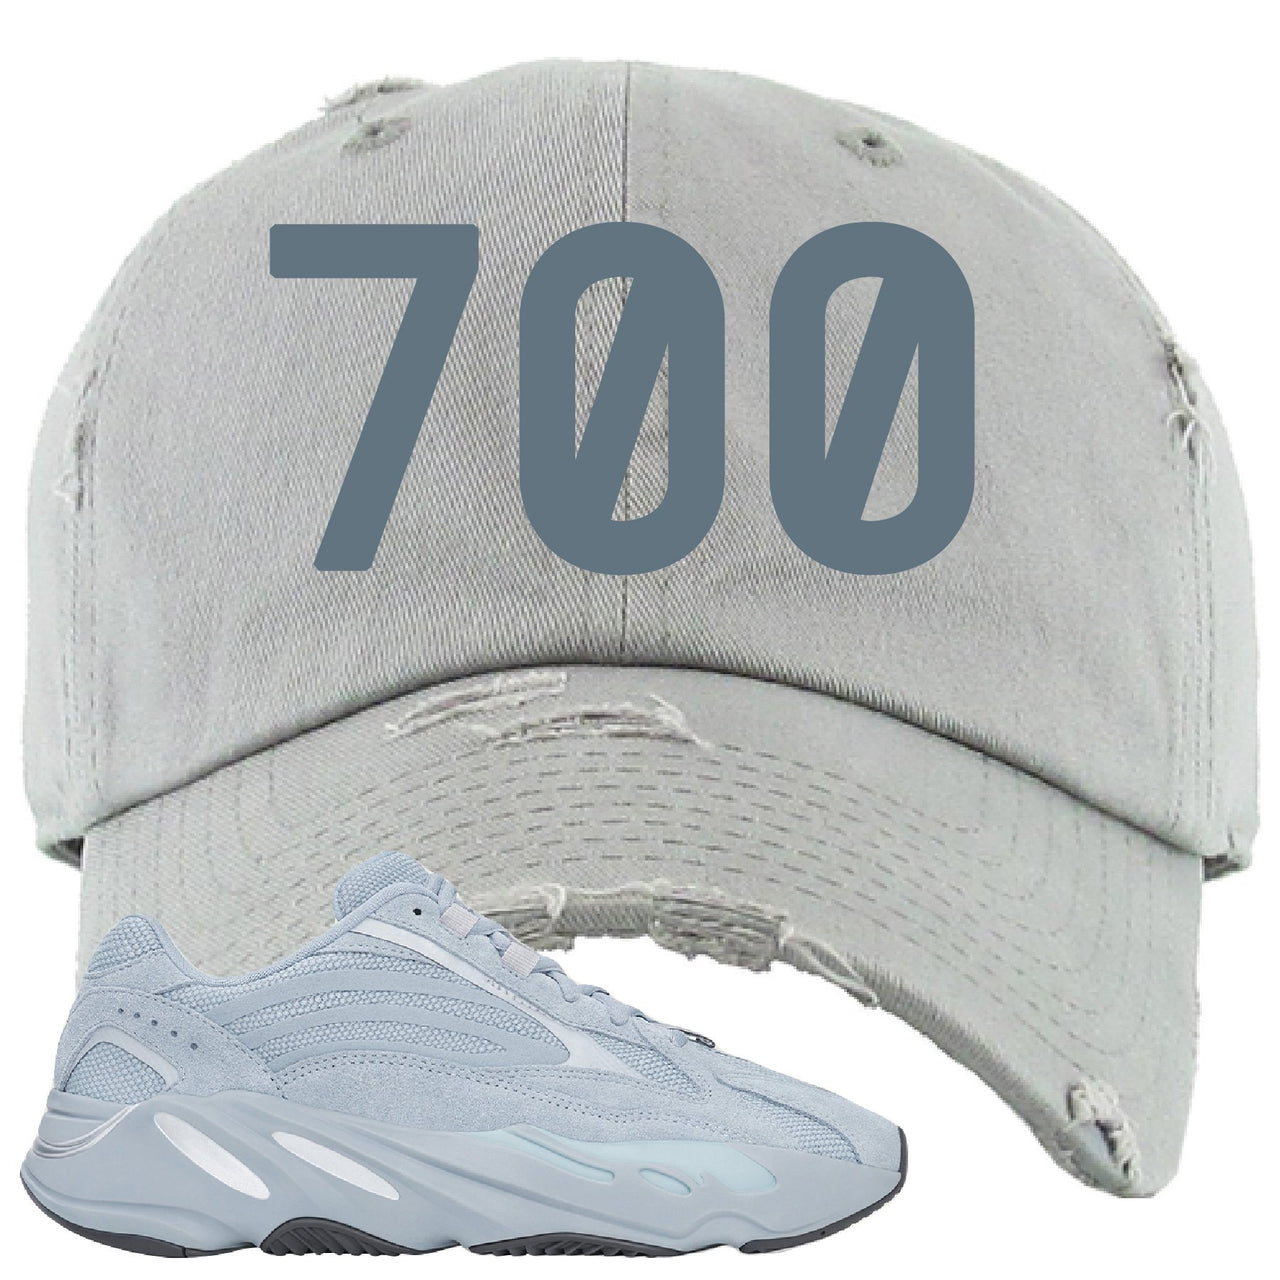 Yeezy Boost 700 V2 Hospital Blue 700 Sneaker Matching Light Gray Distressed Dad Hat